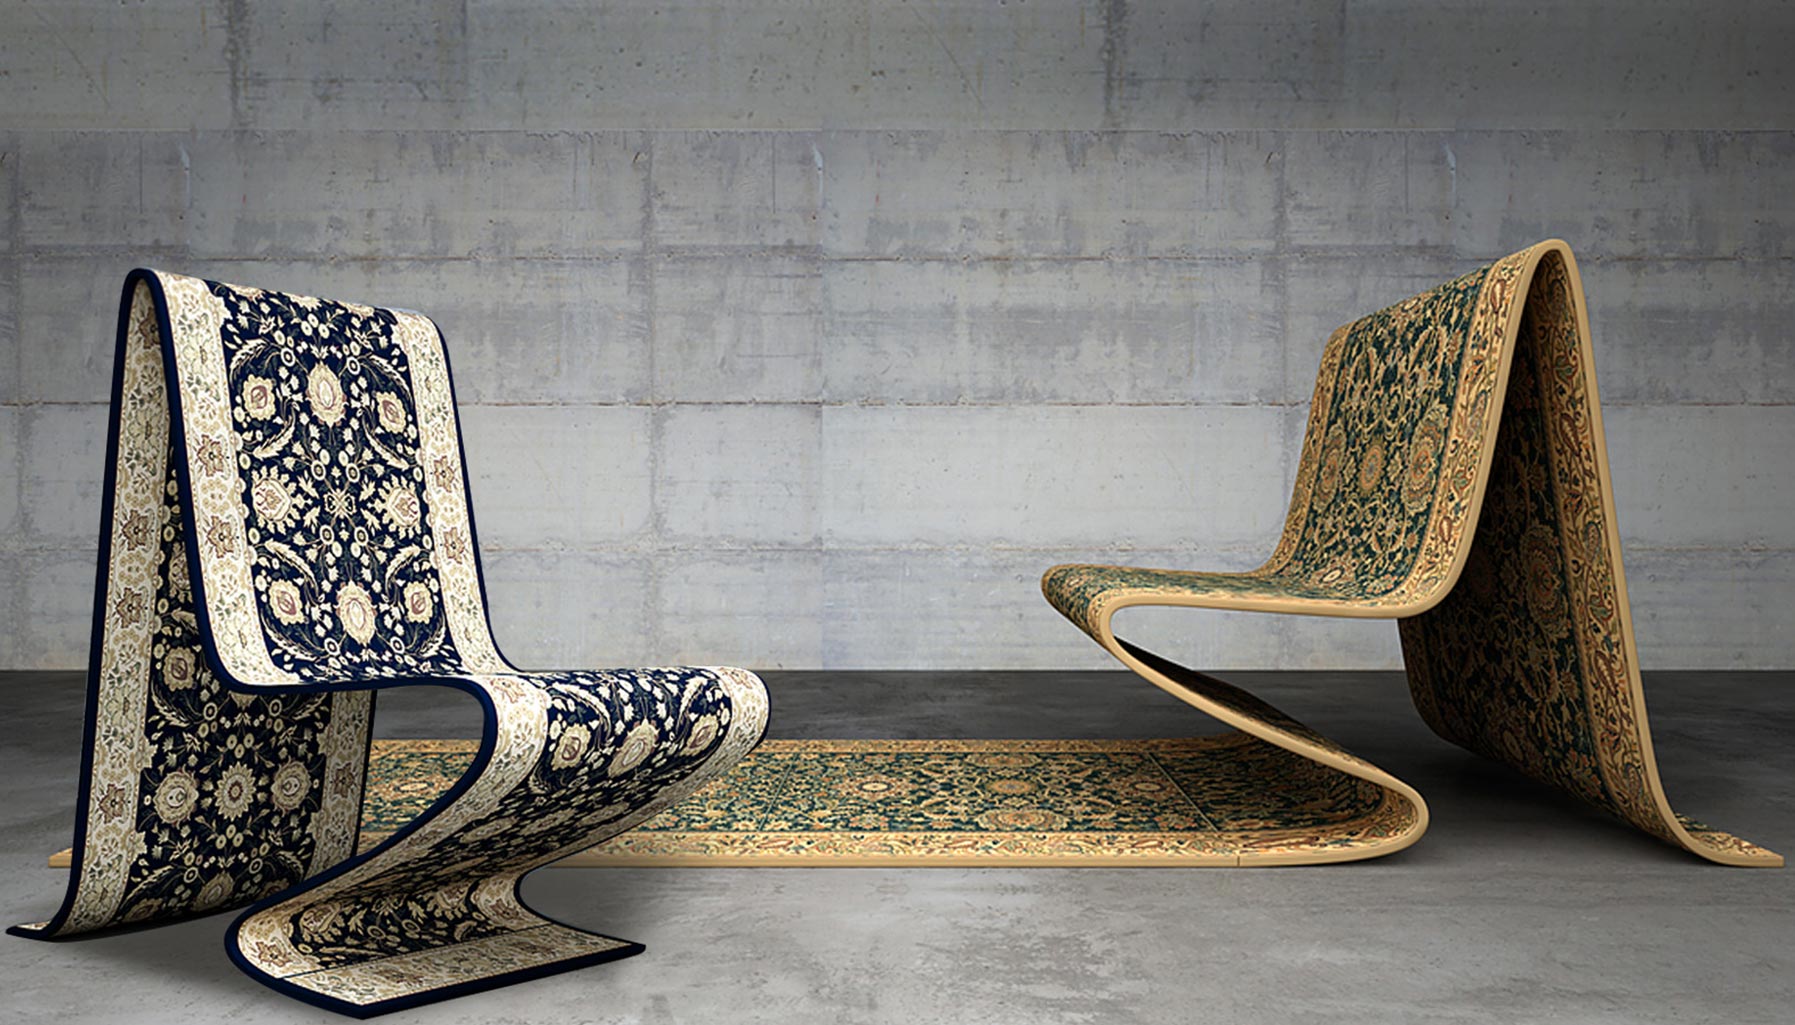 The Magical Carpet Chairs of Stelios Mousarris | RobbReport Malaysia